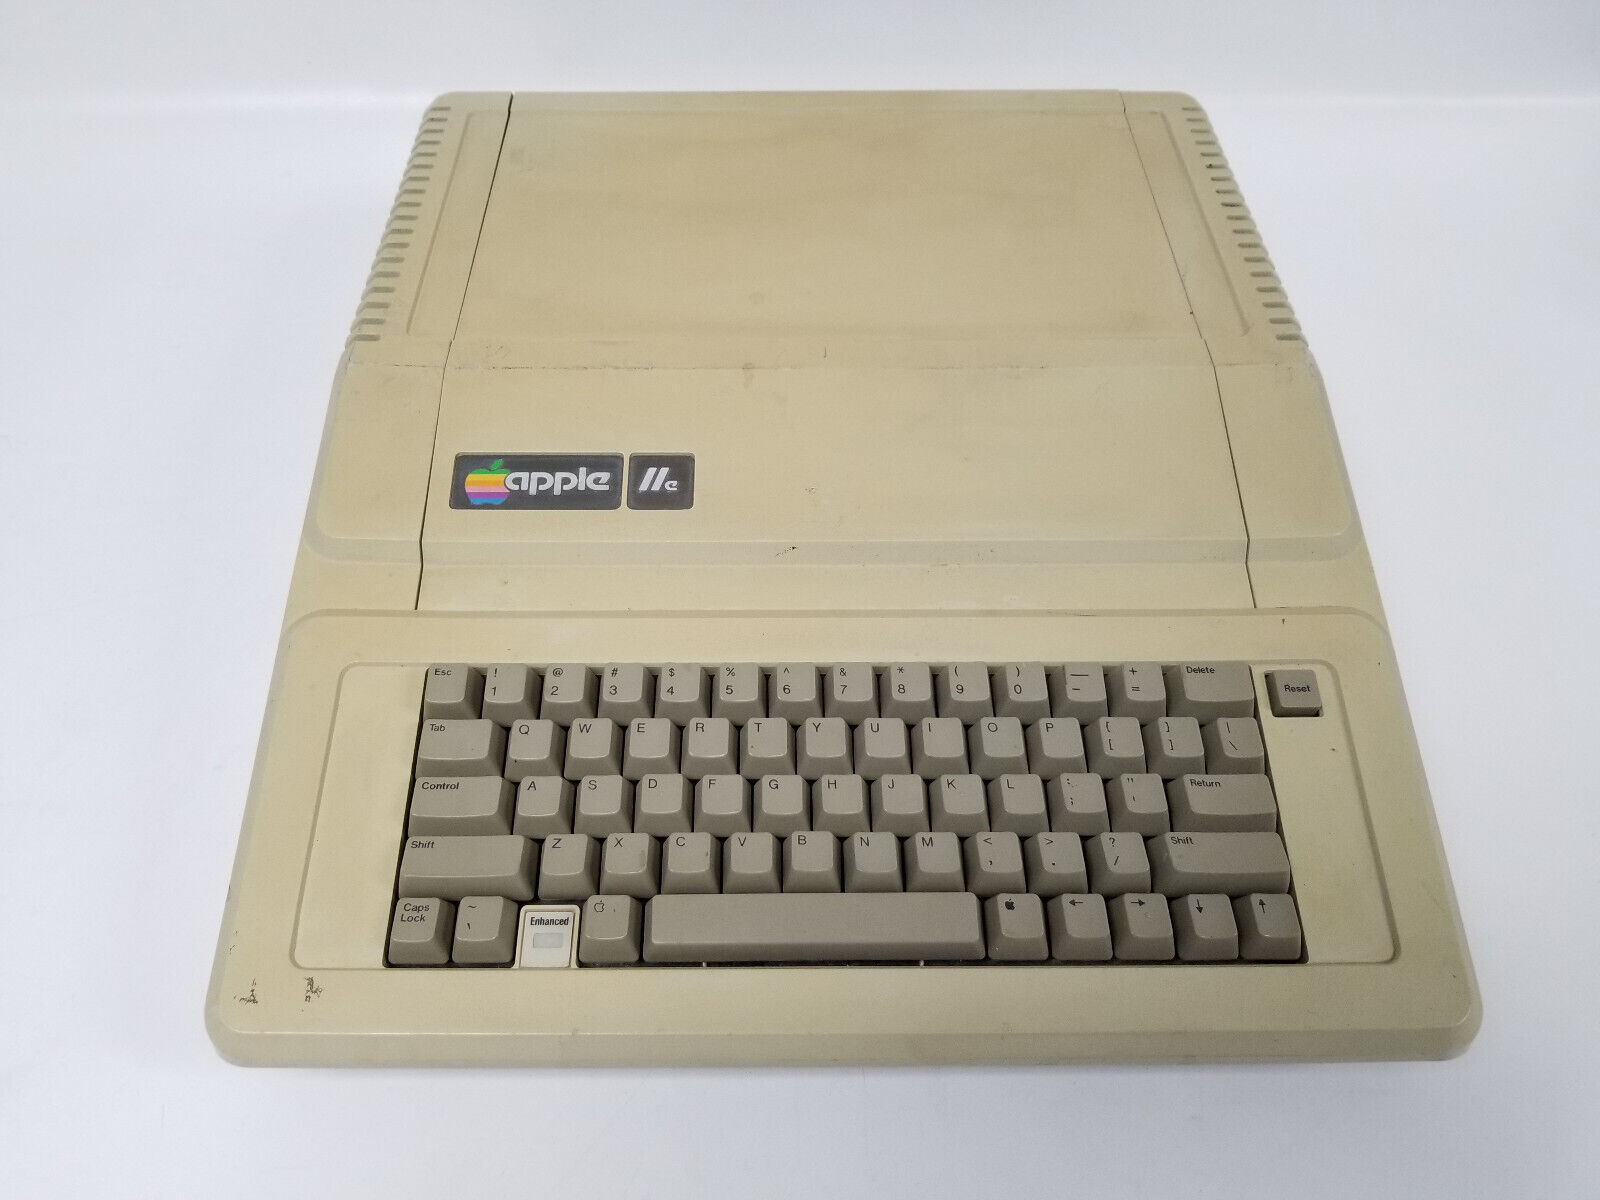 Vintage Apple IIe Computer A2S2064 (Powers On)